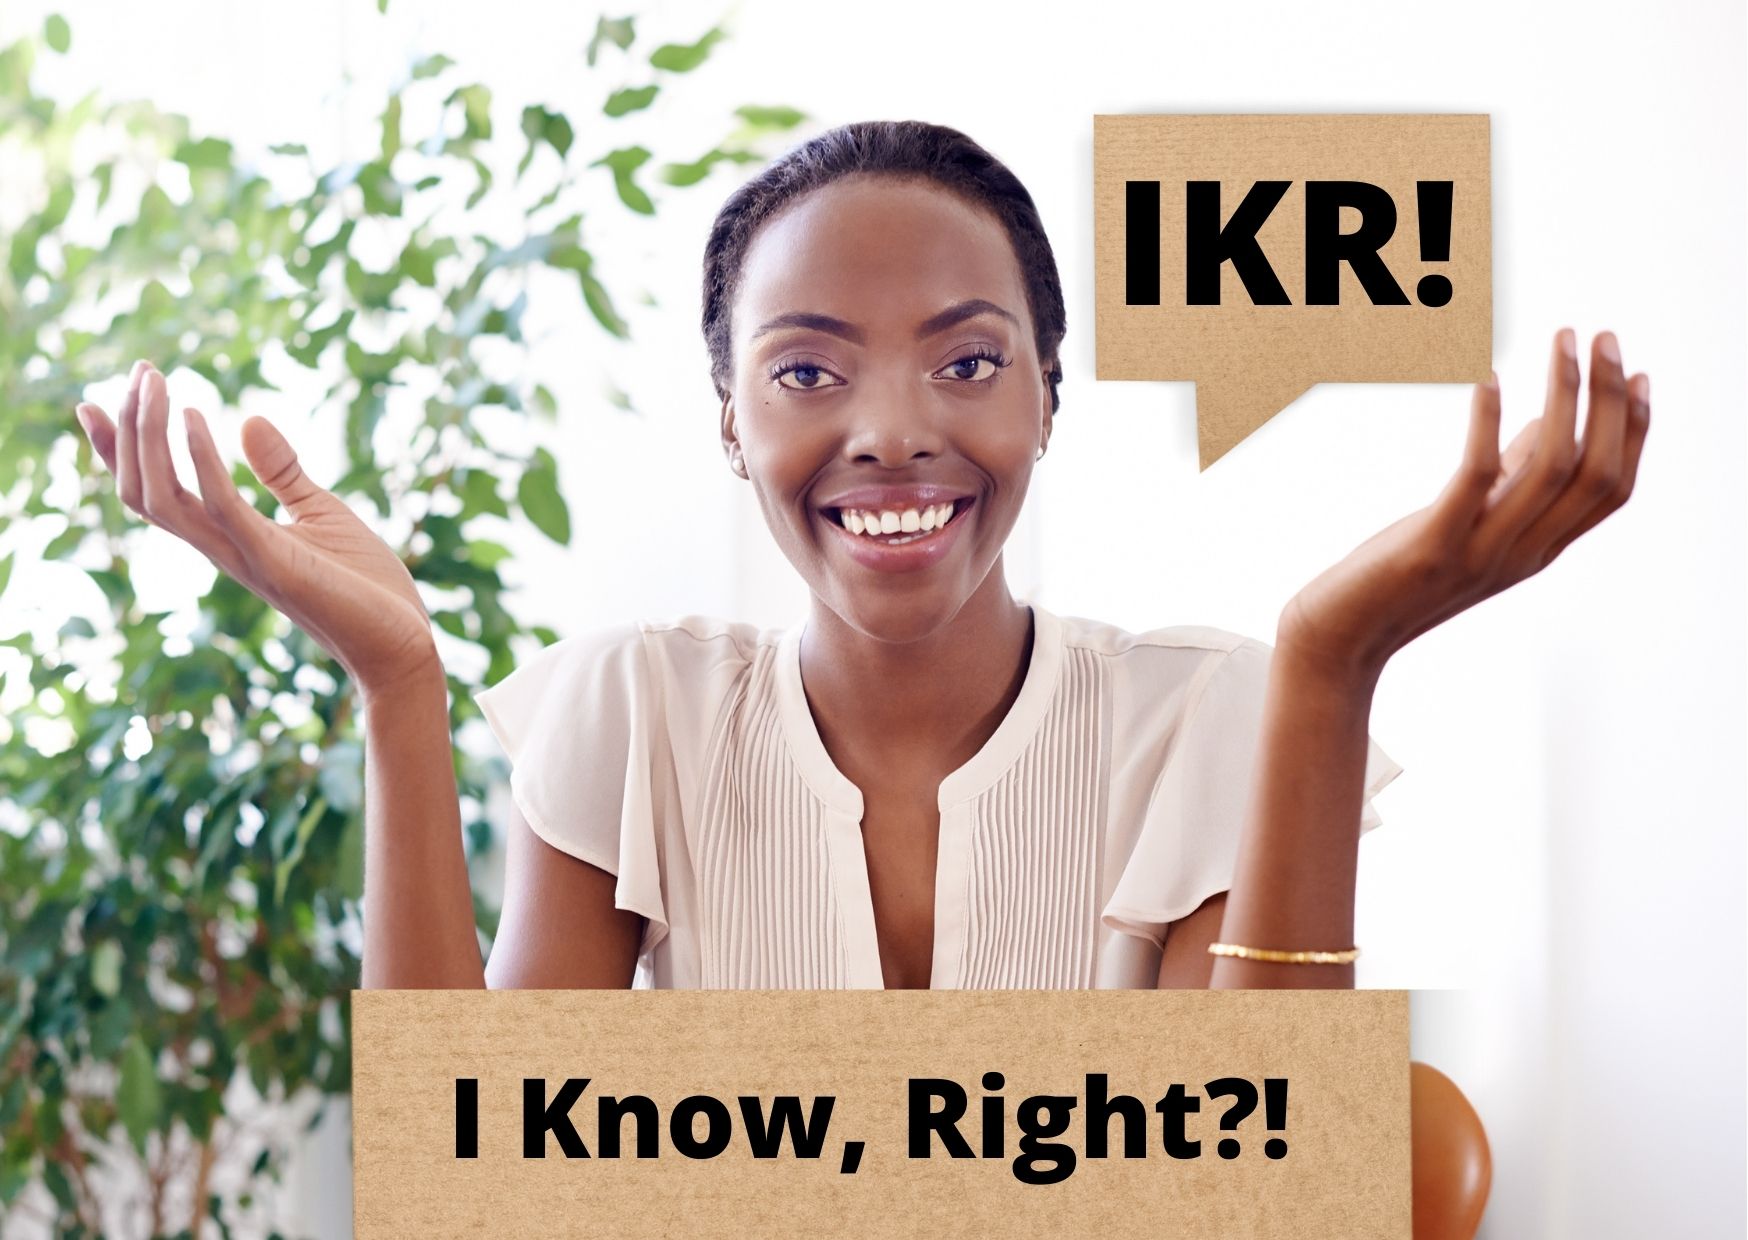 Graphic with a woman and two captions: "IKR" and "I Know, Right?!"